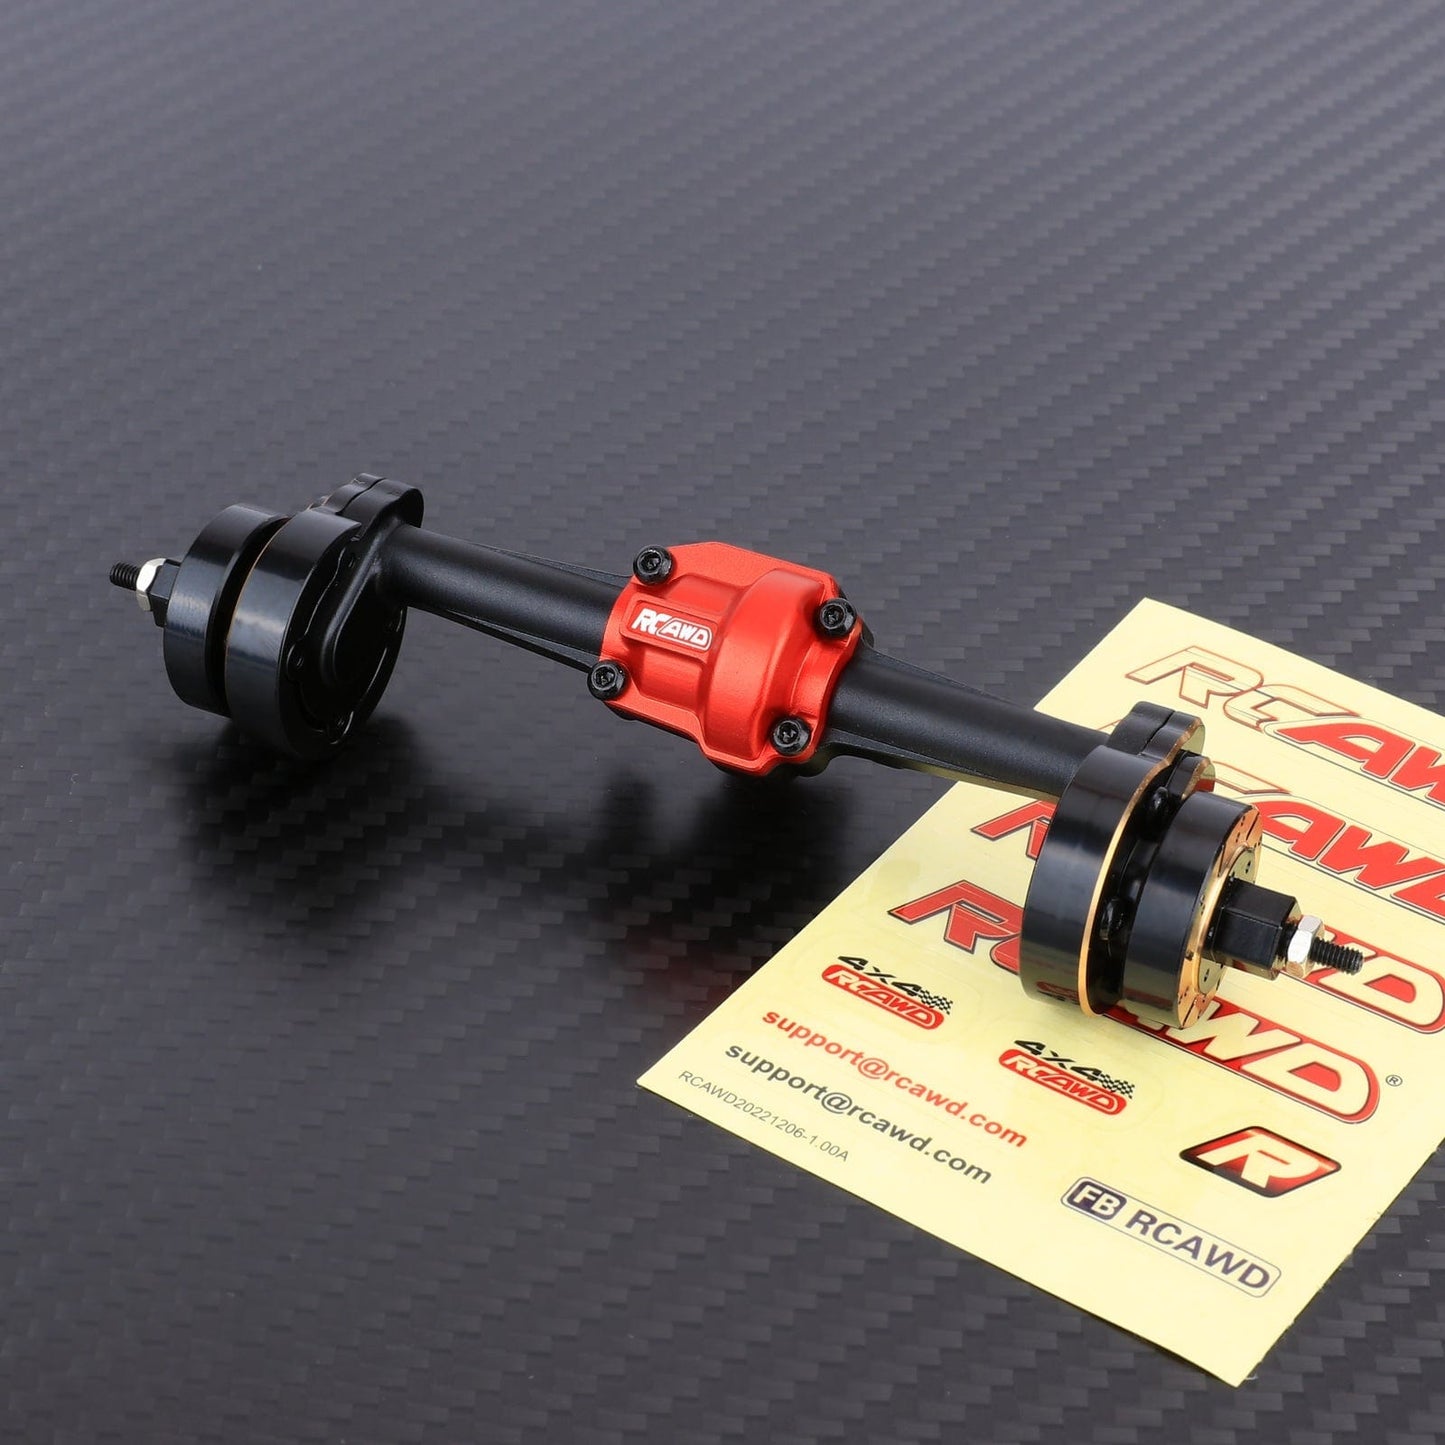 RCAWD HobbyPlus CR18 Rear Axle RCAWD 1/18 HobbyPlus CR18 Upgrades Widen 10mm Reverse Design Portal Axles with Brass Hex